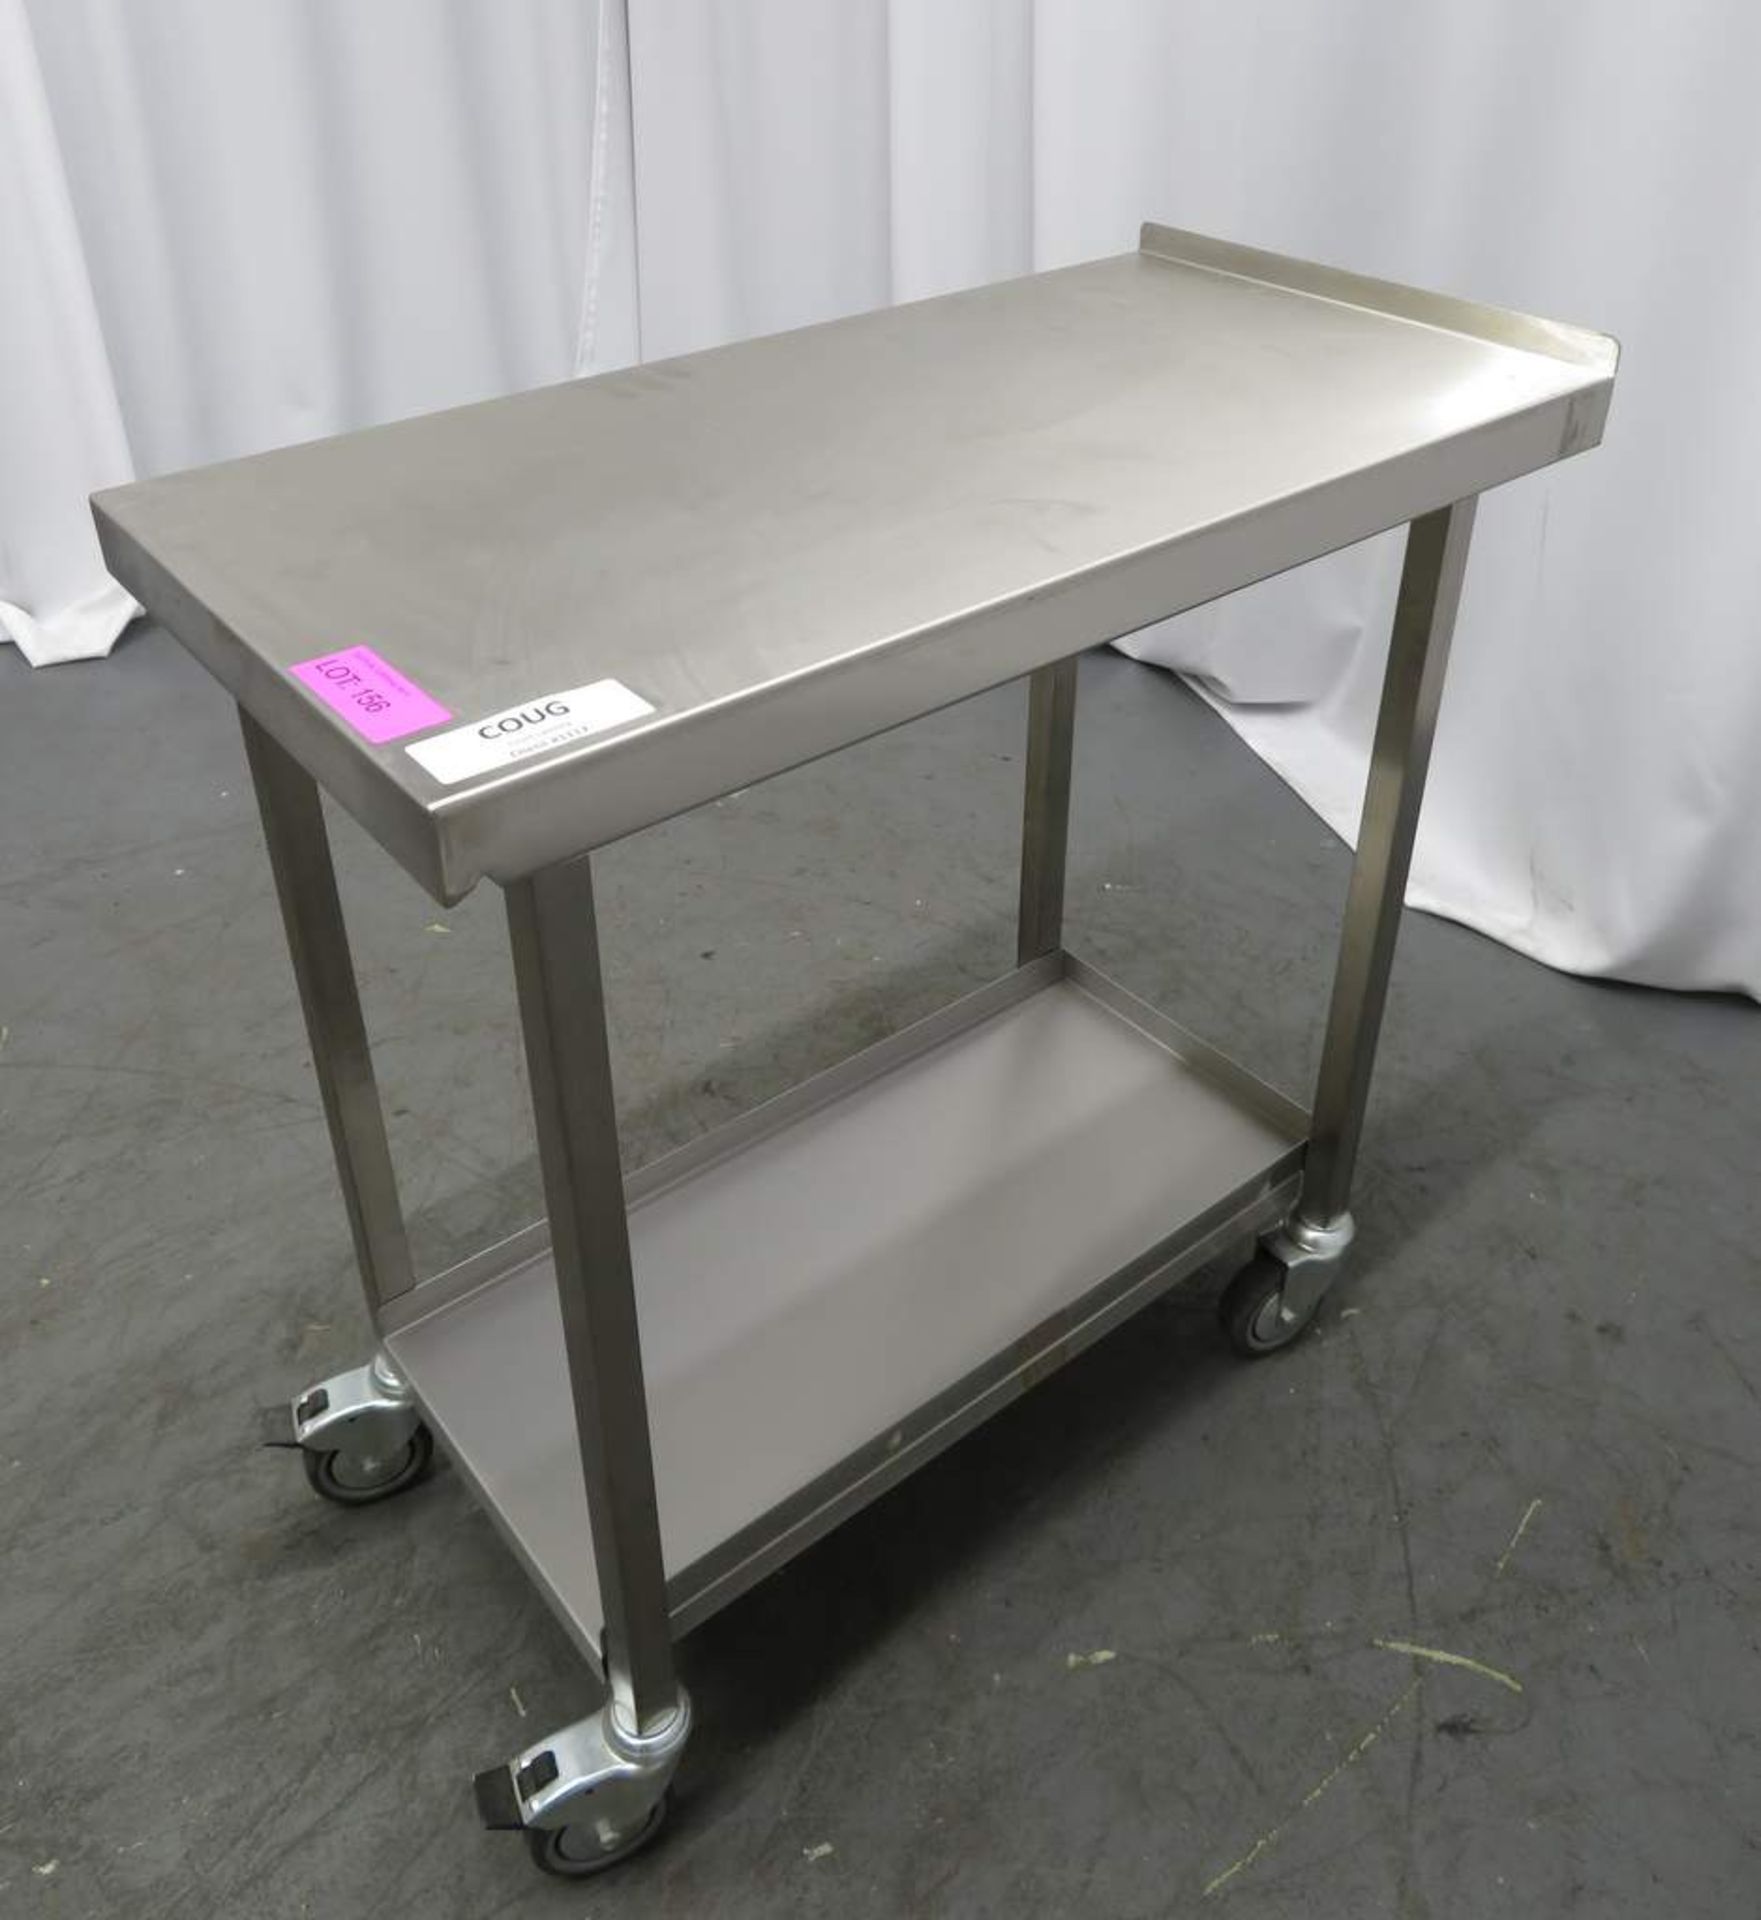 PORTABLE STAINLESS STEEL END KITCHEN PREPERATION TABLE WITH UNDER SHELF - Image 3 of 3